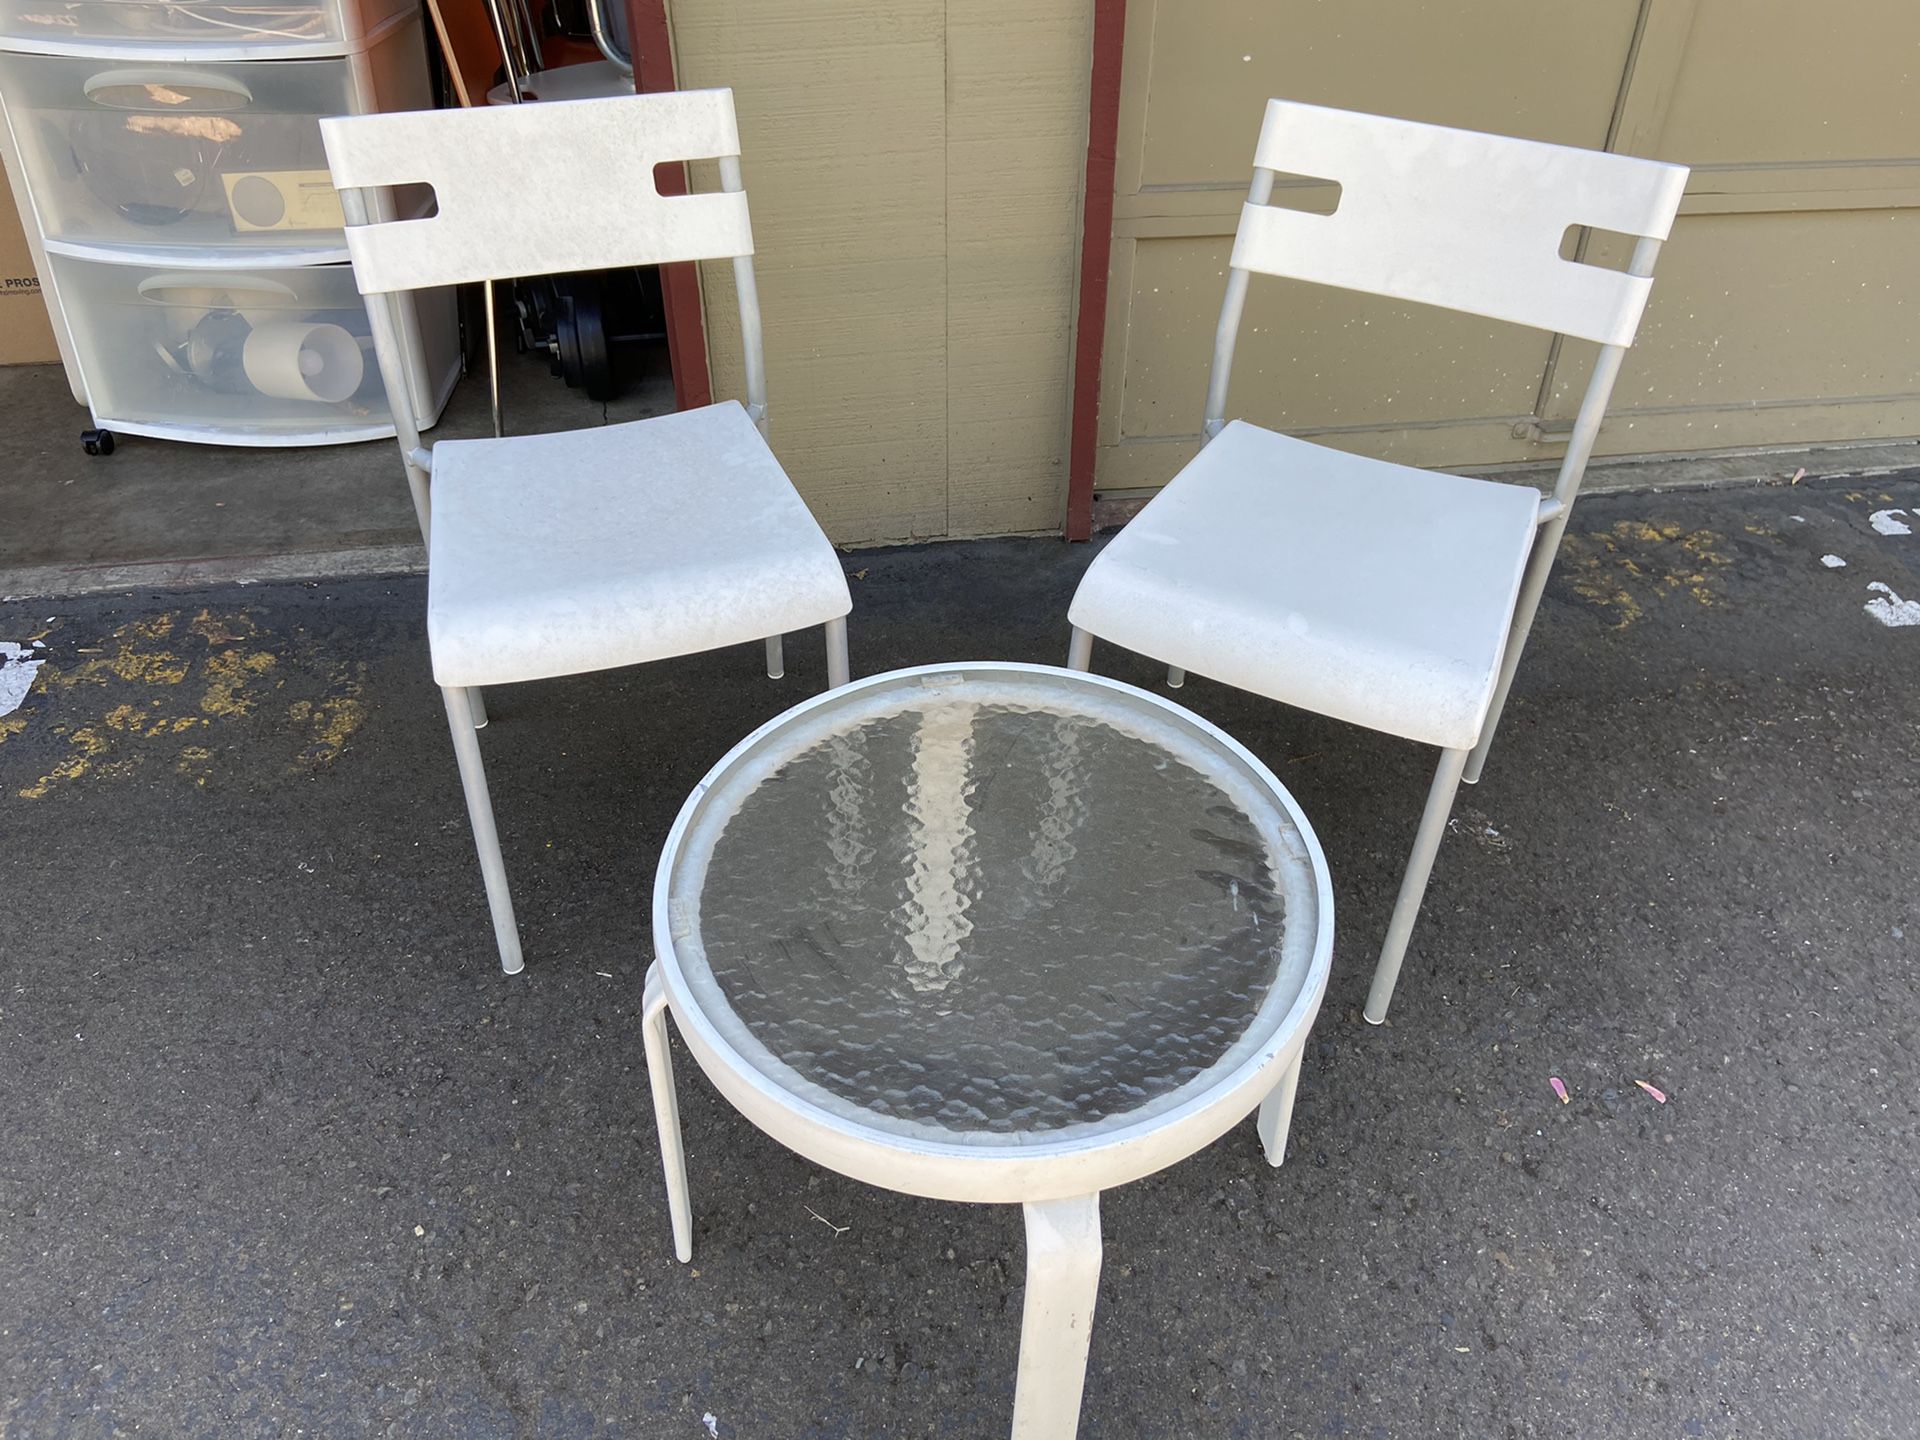 JUST THE CHAIRS! Patio chairs/ outdoor furniture